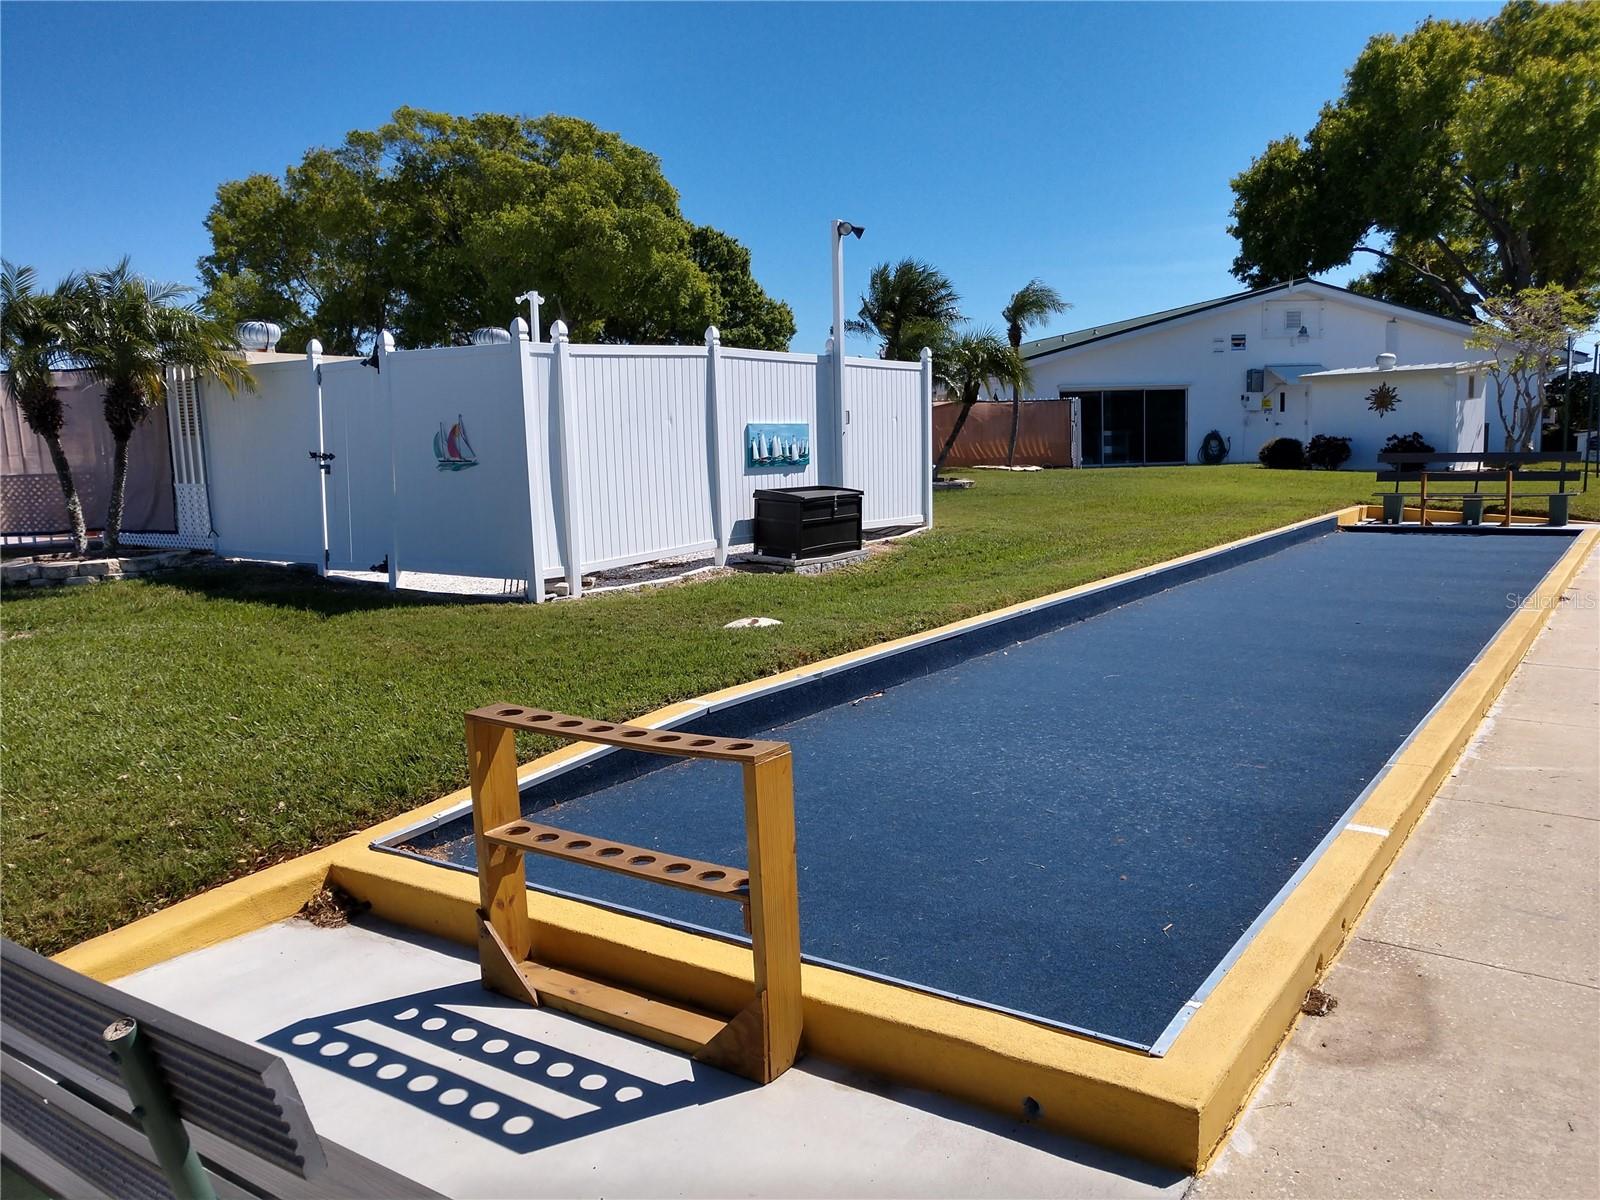 View of community laundry room on back side of clubhouse.  Pool area to left and new bocce court is shown.